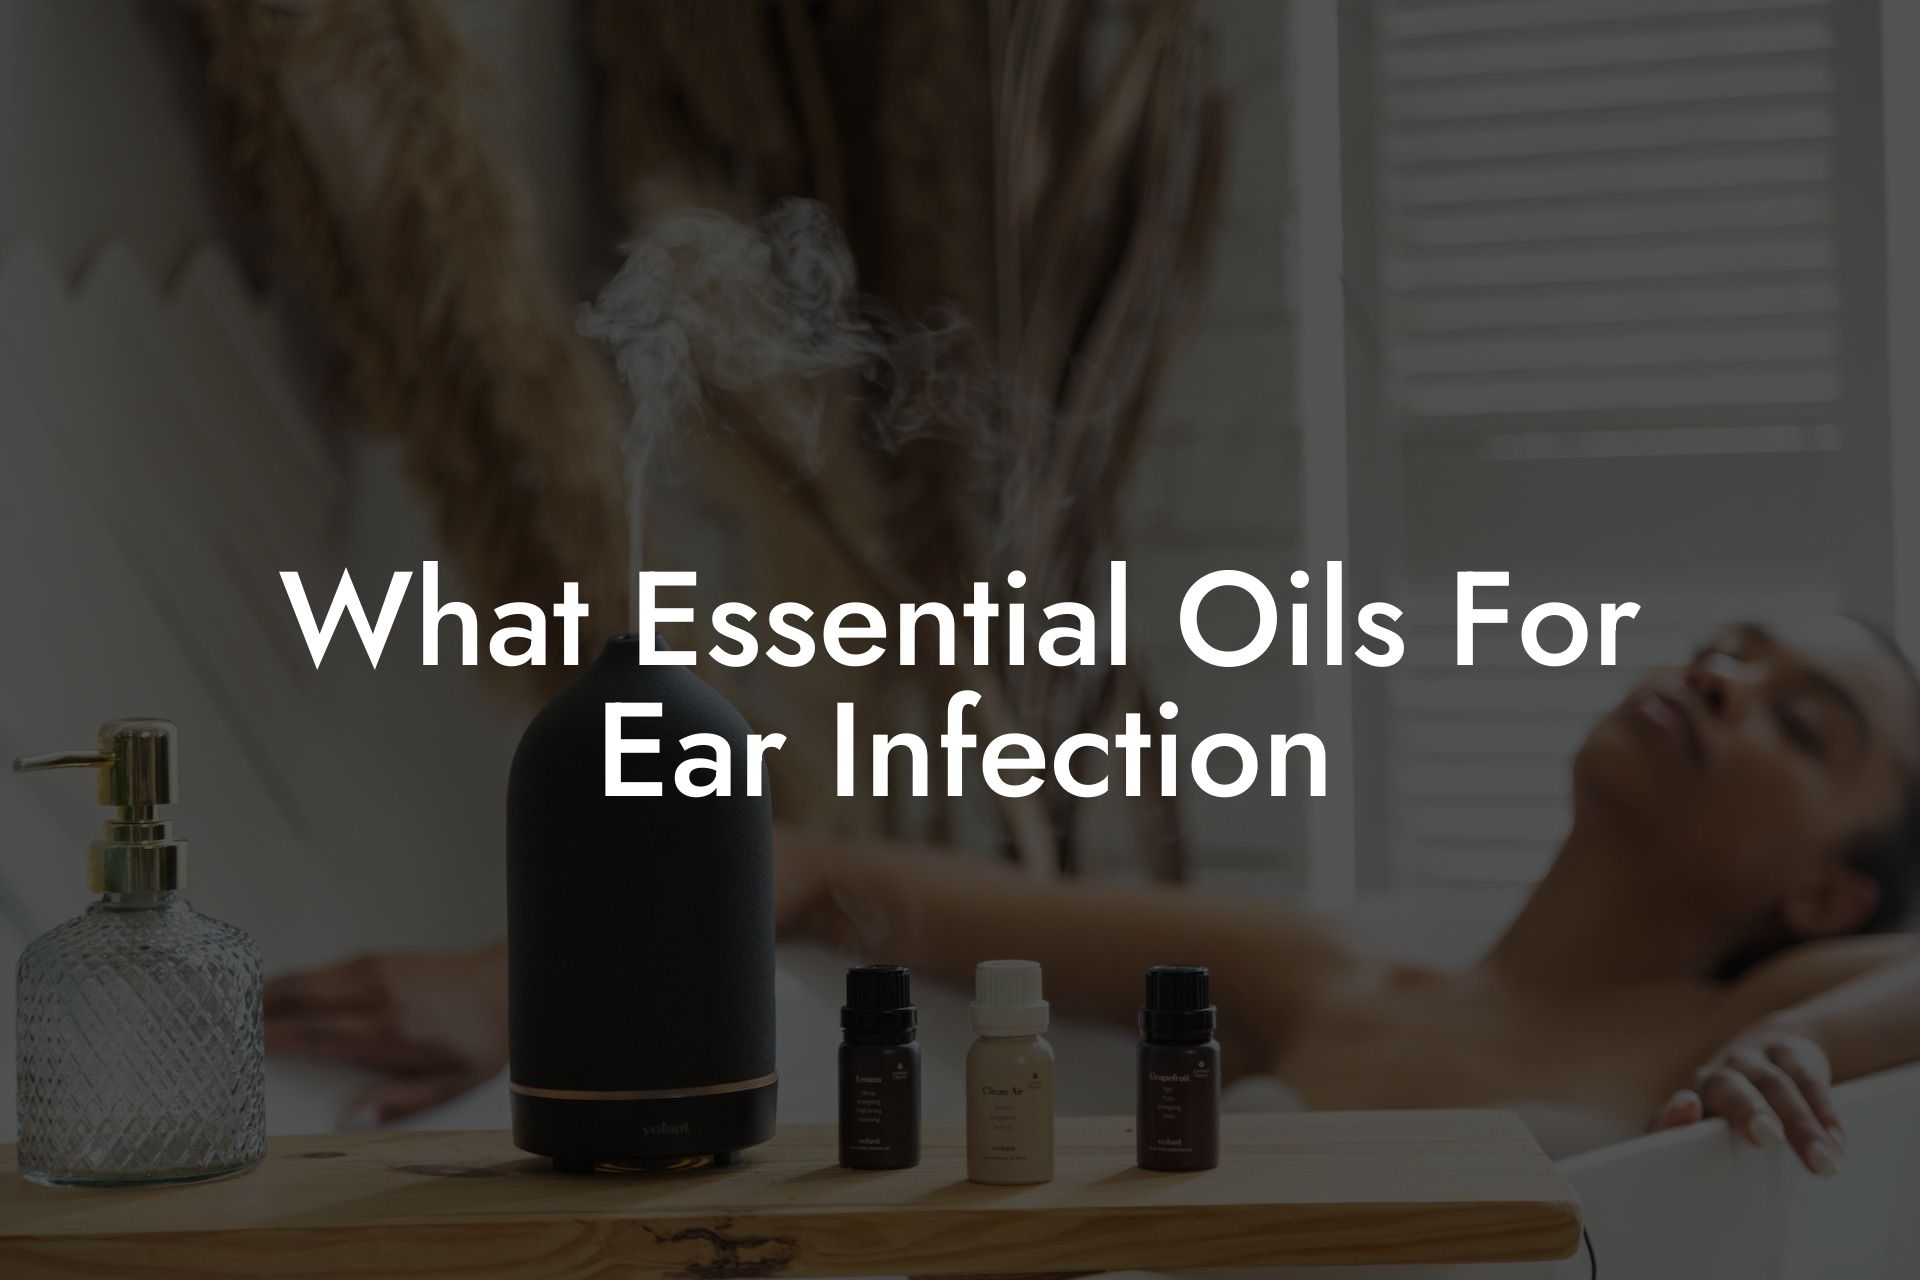 What Essential Oils For Ear Infection